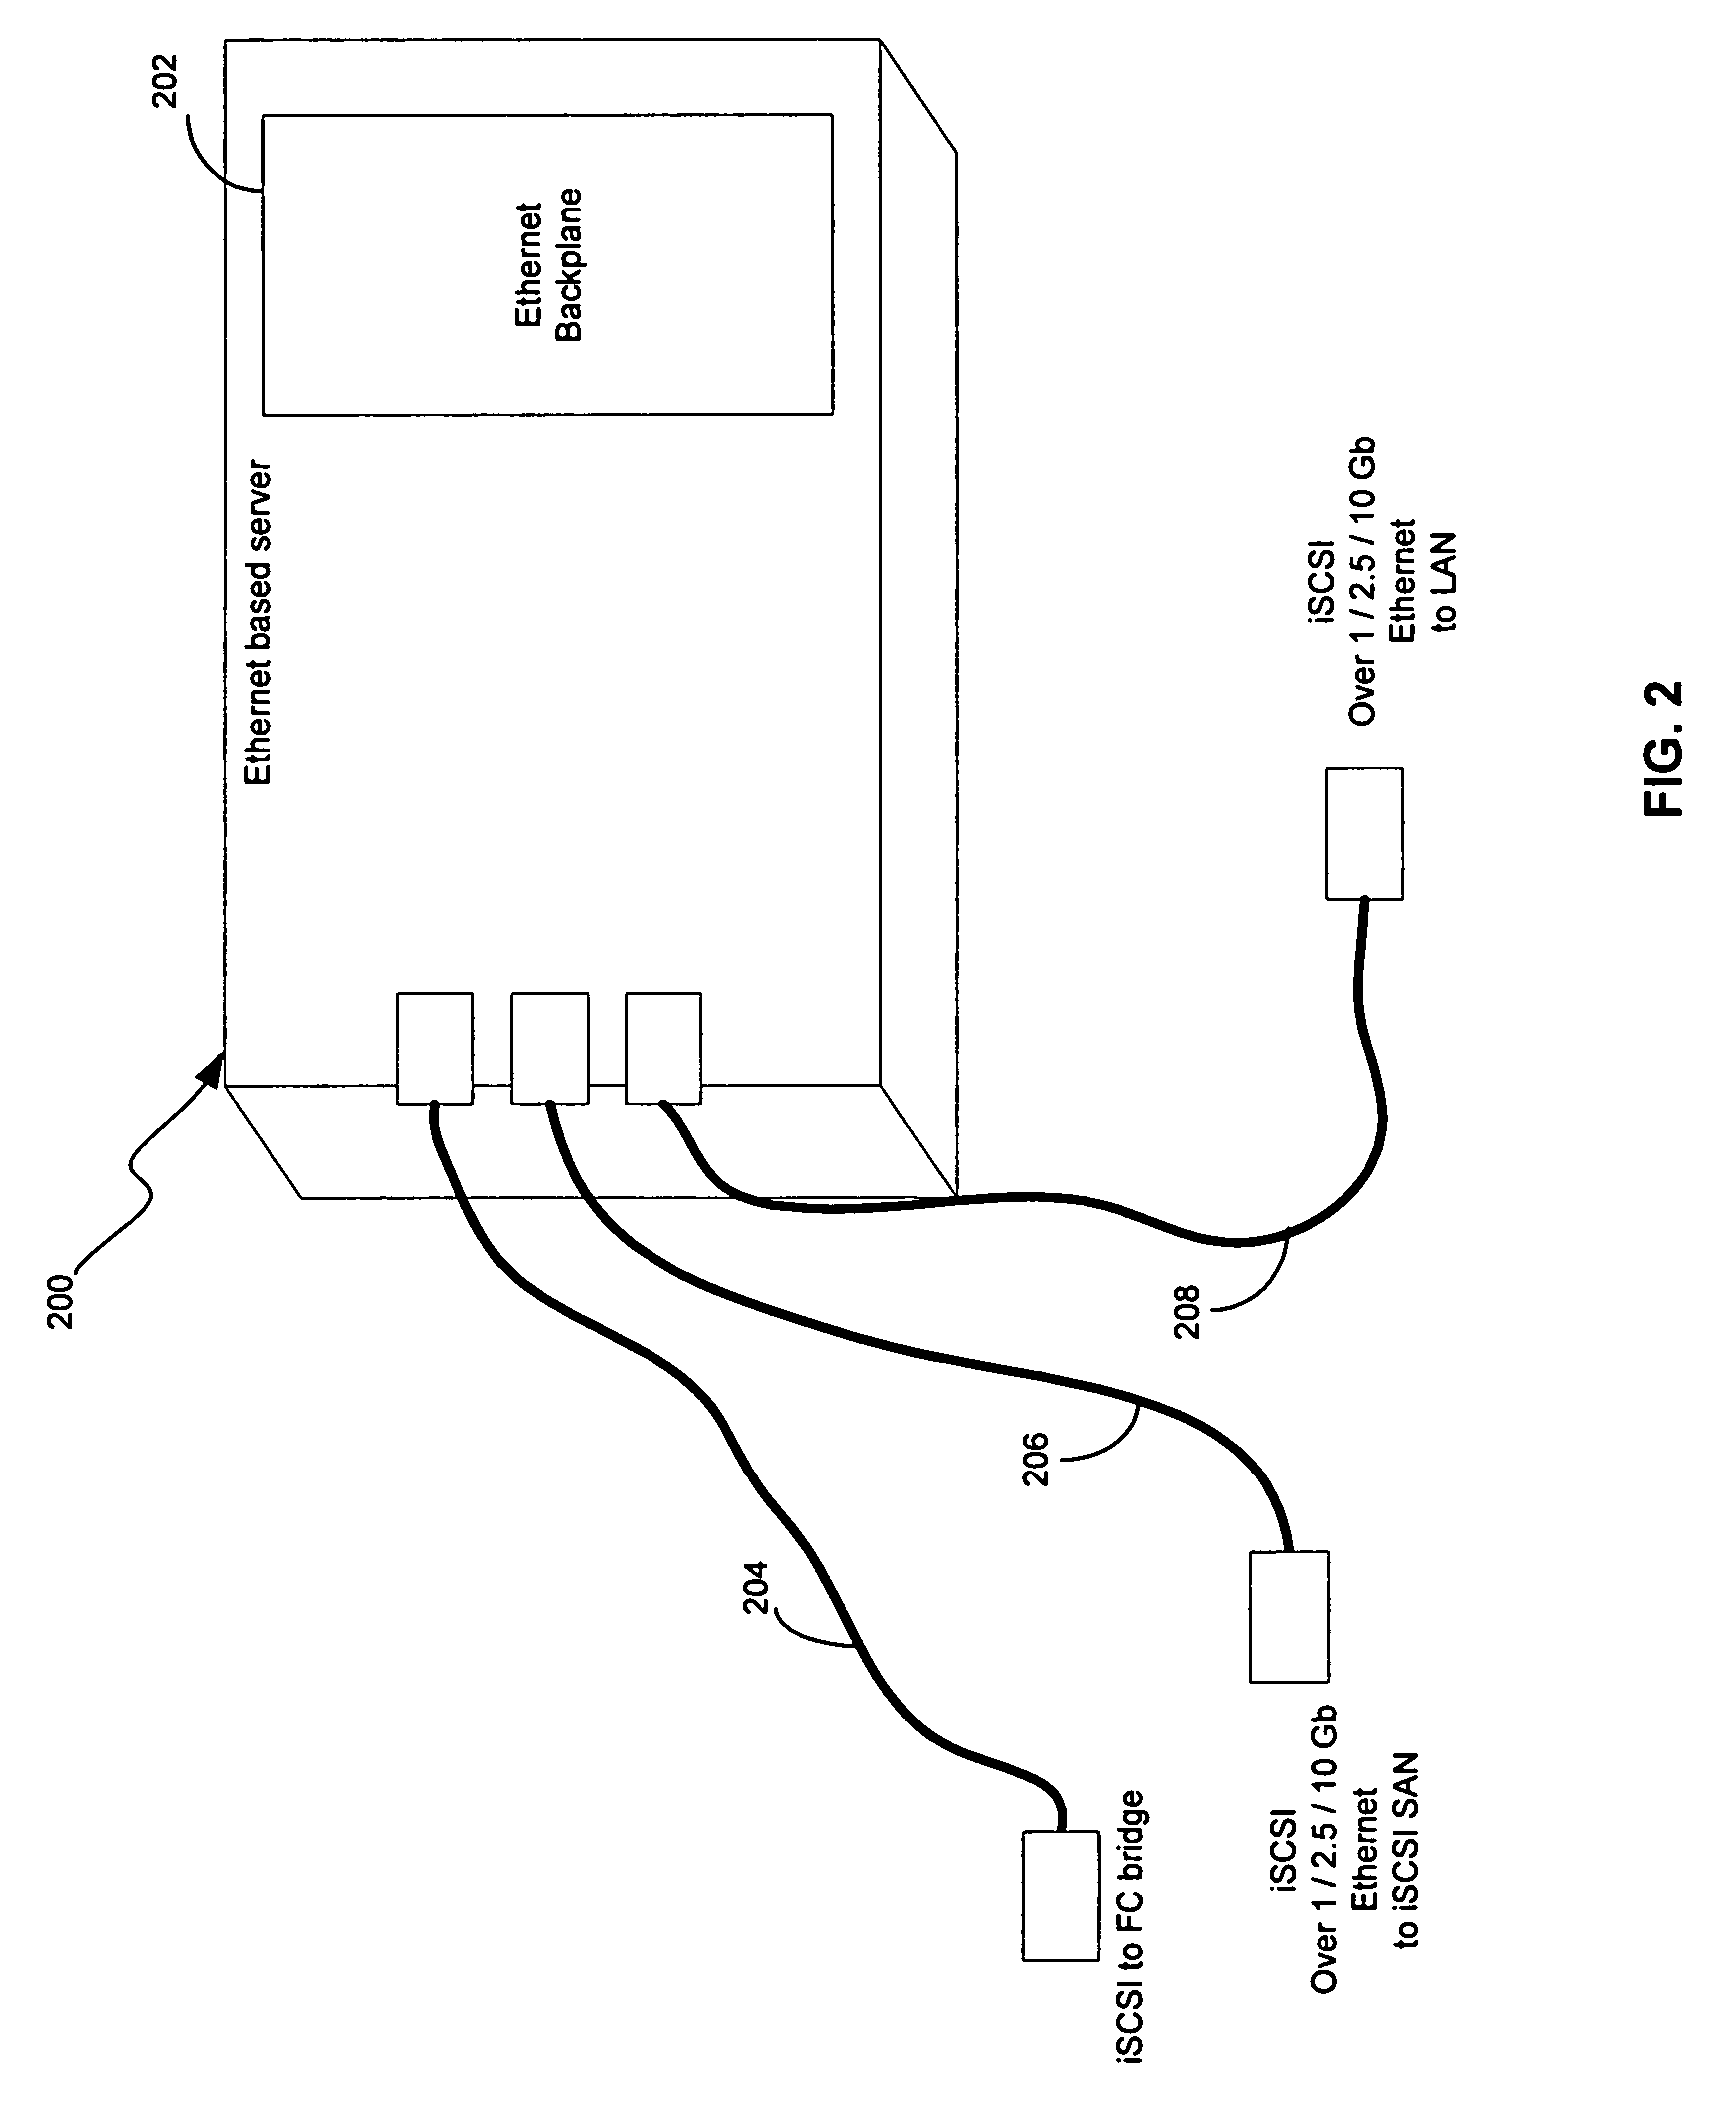 Method and system for iSCSI boot in which an iSCSI client loads boot code from a host bus adapter and/or network interface card